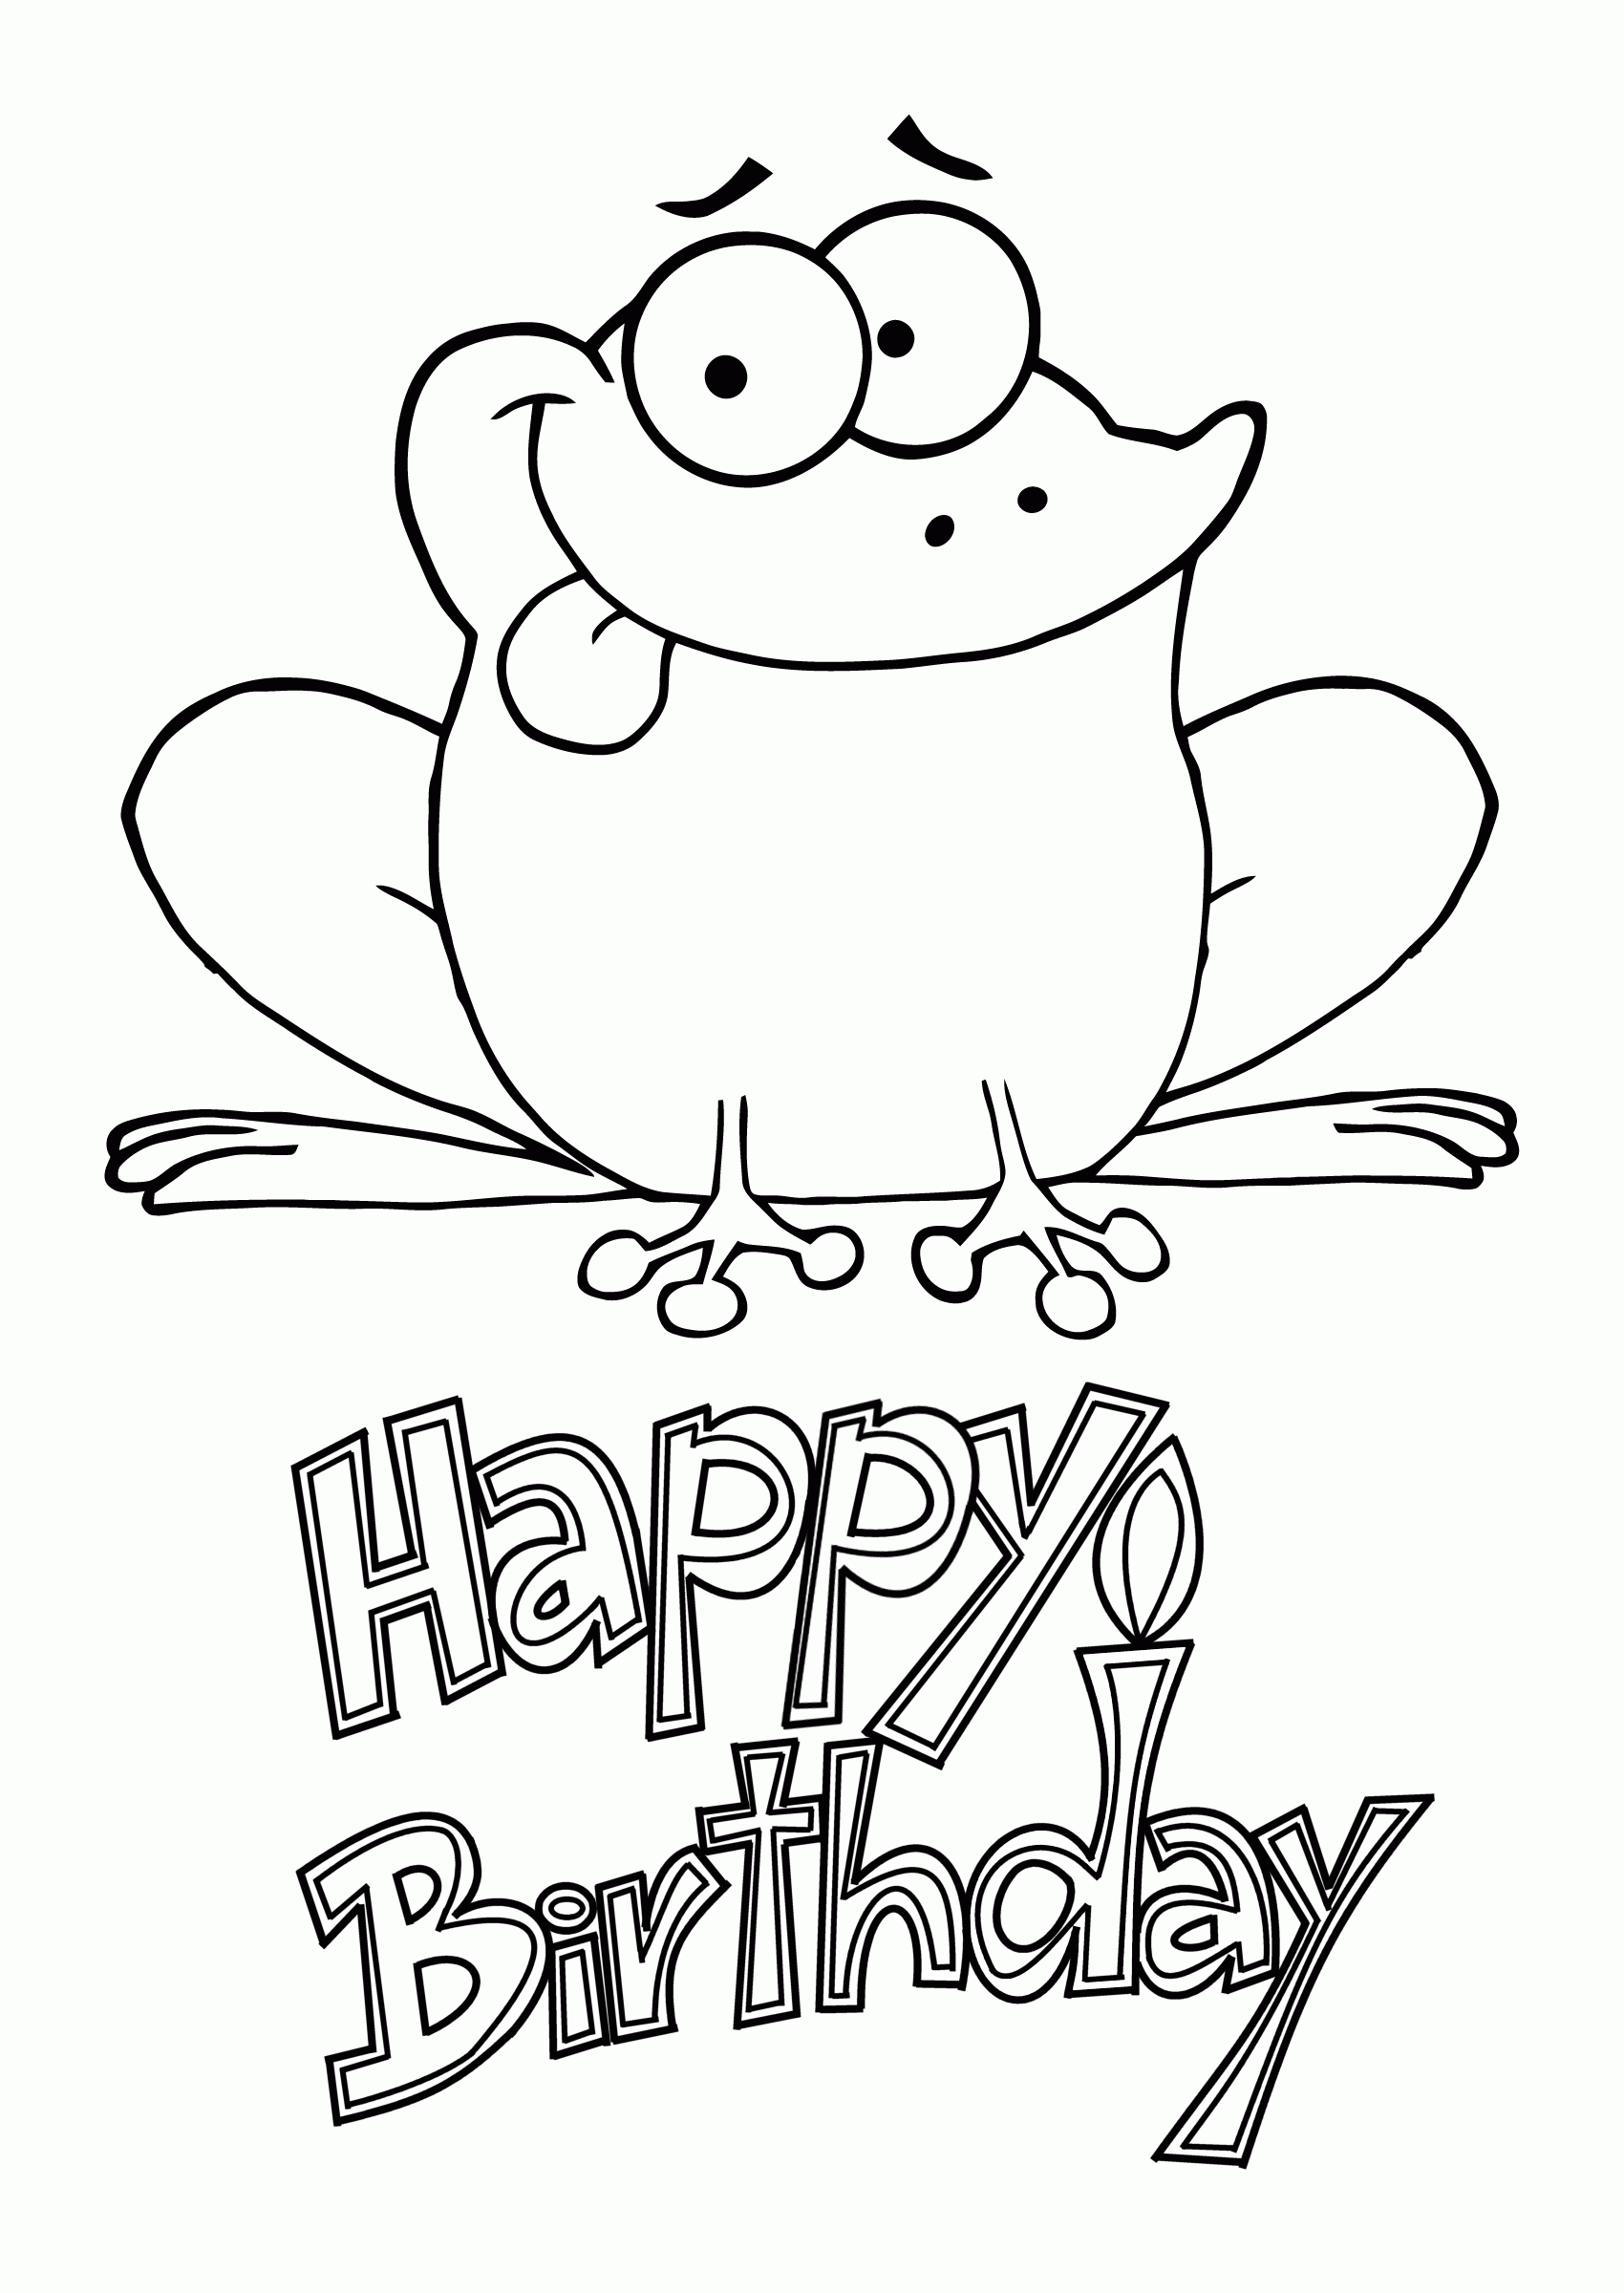 Free Printable Happy Birthday Coloring Pages Free Printable Templates